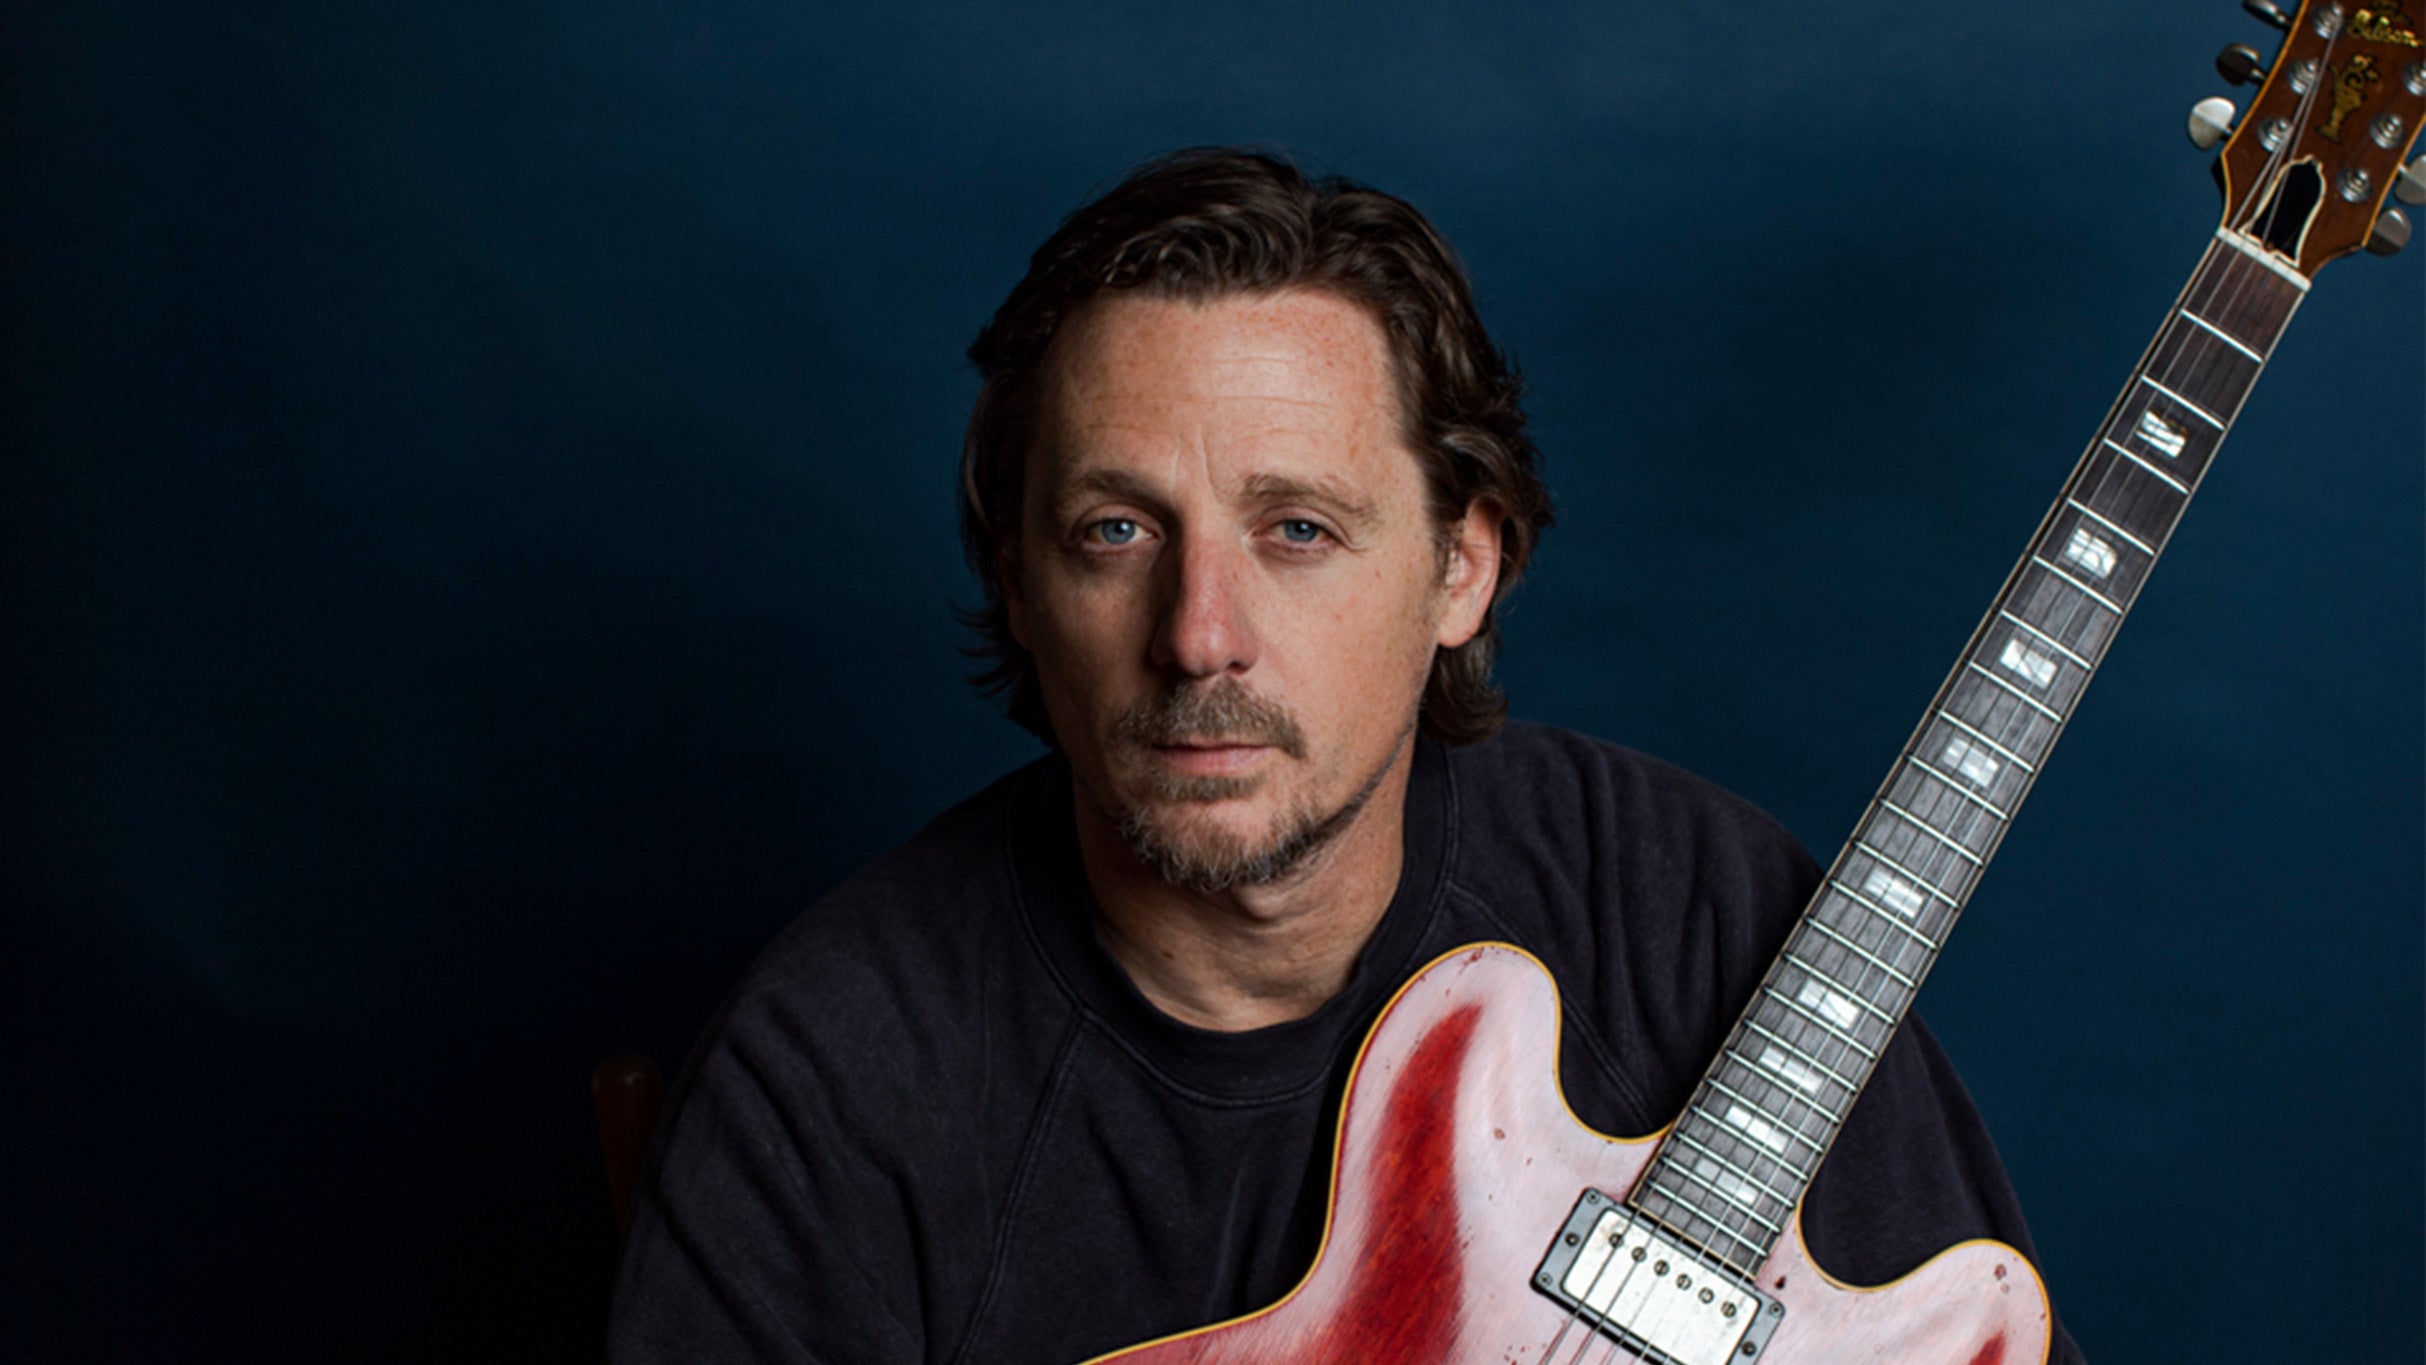 An Evening with Sturgill Simpson - Why Not? Tour presale password for real tickets in Bend